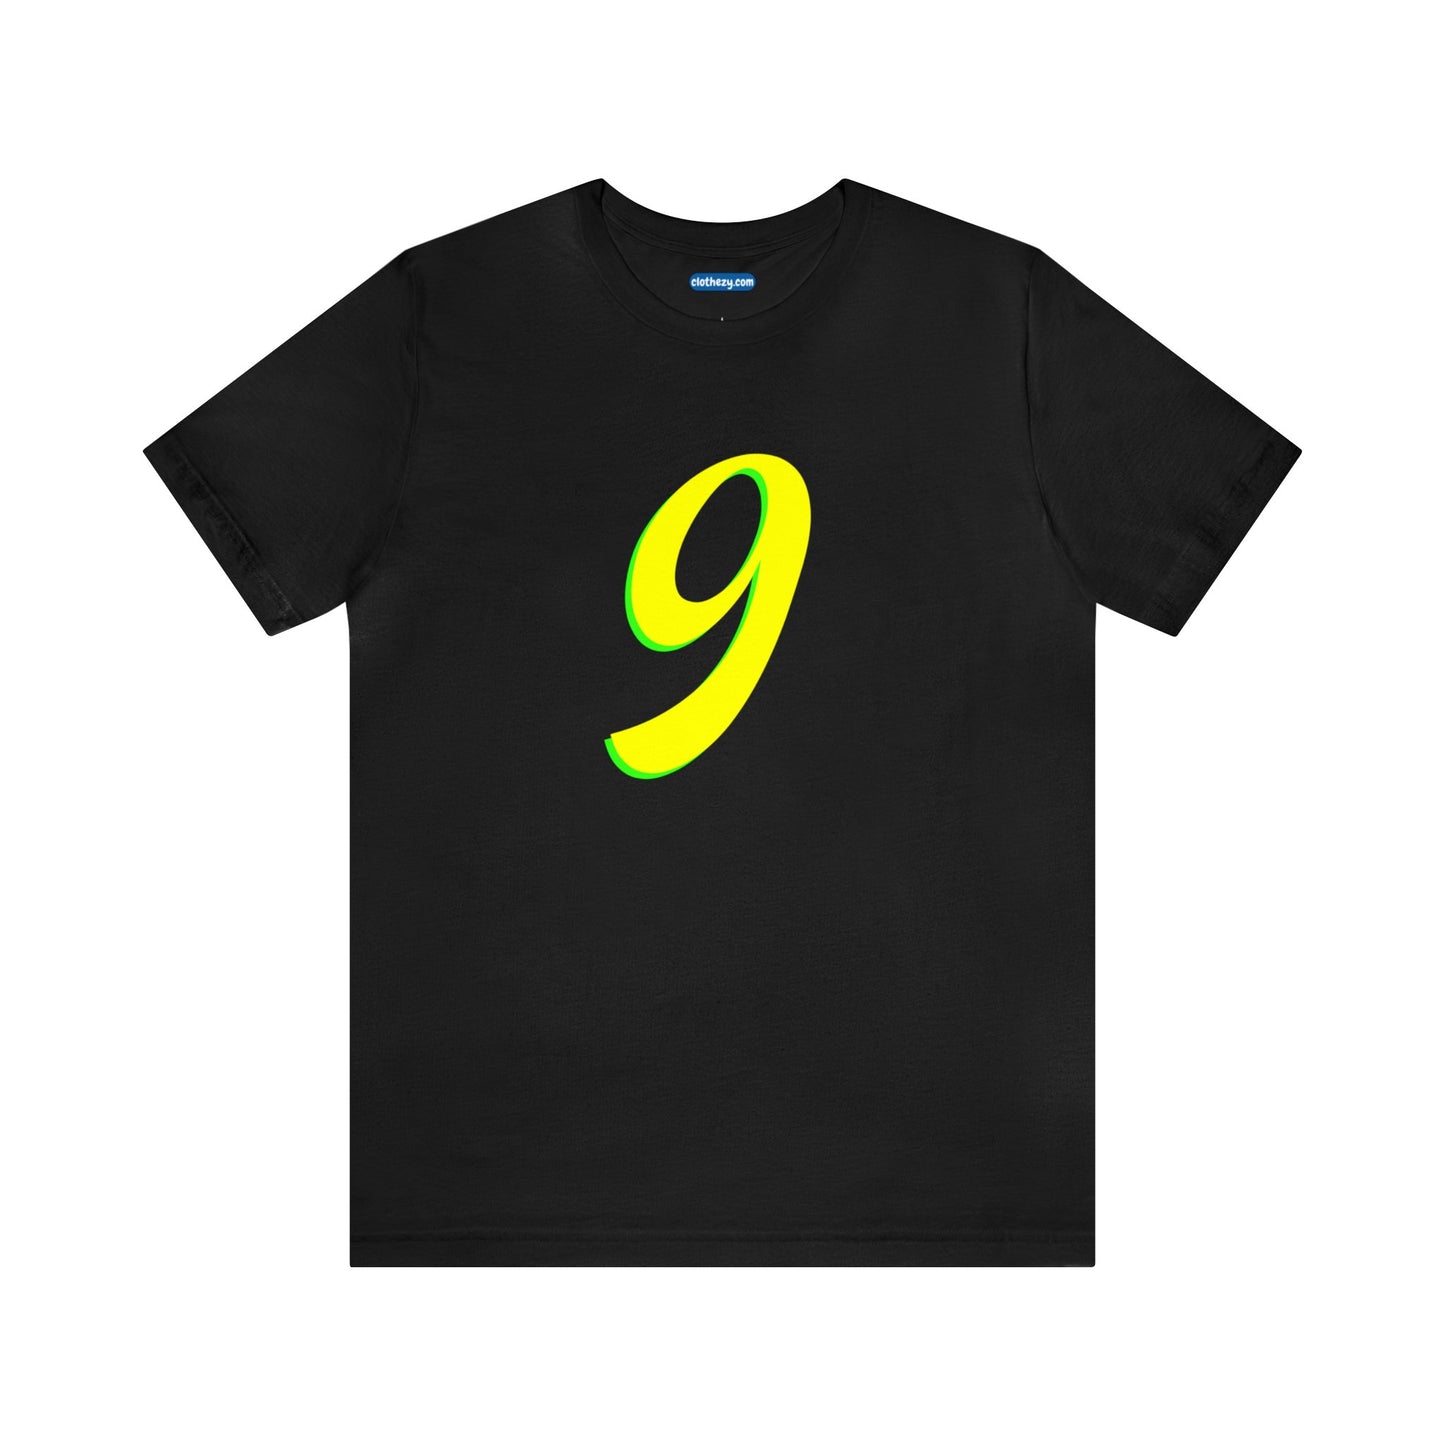 Number 9 Design - Soft Cotton Tee for birthdays and celebrations, Gift for friends and family, Multiple Options by clothezy.com in Dark Grey Heather Size Small - Buy Now